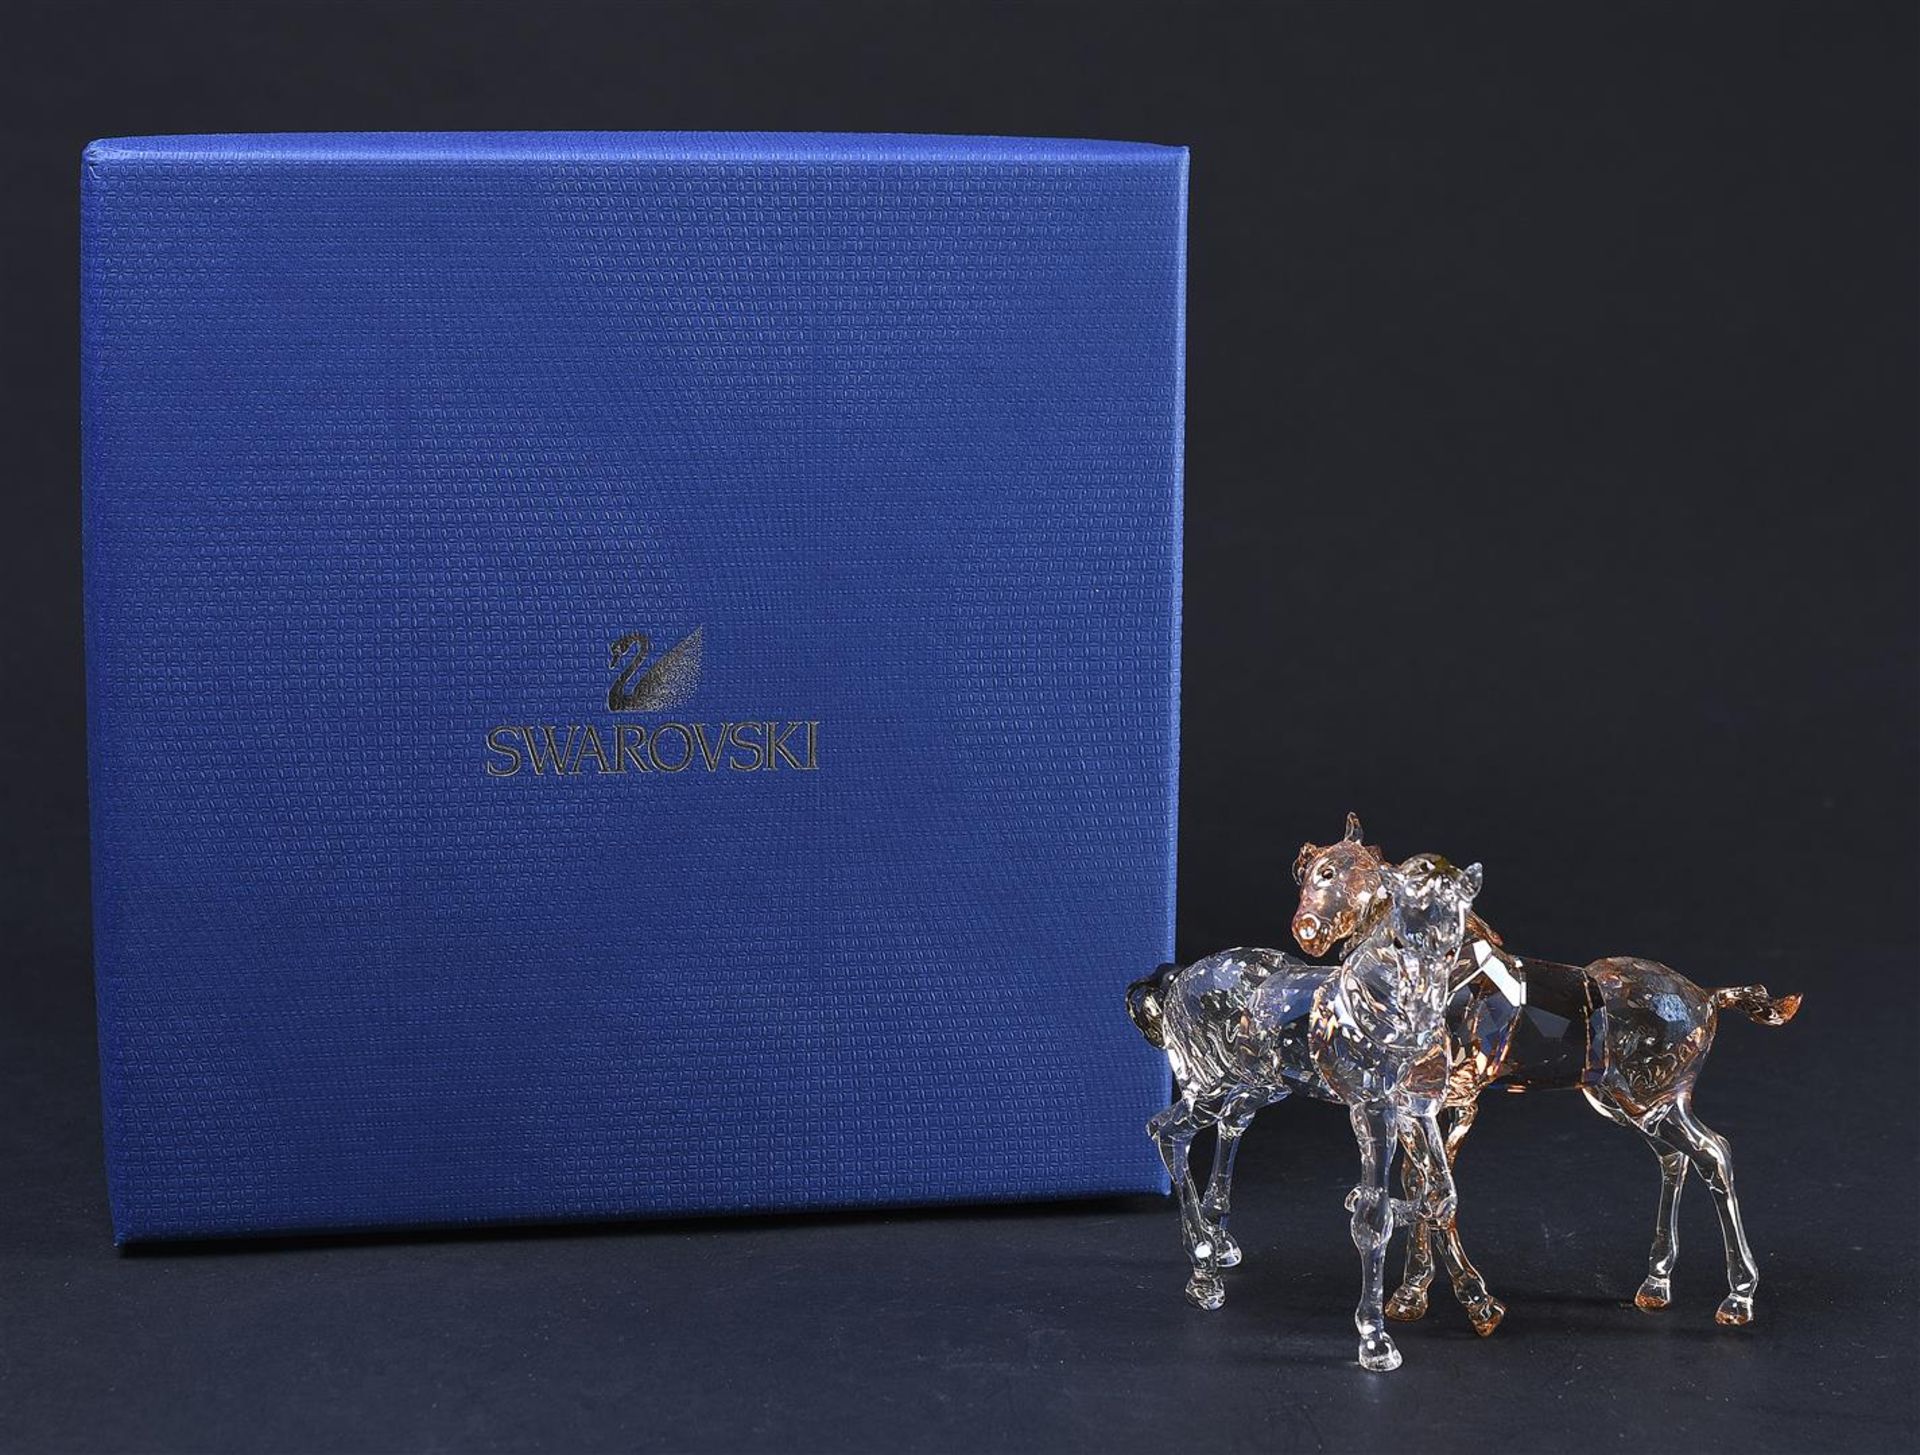 Swarovski, Foals, Year of issue 2012,1121627. Includes original box.
11,9 x 9,2 cm. - Image 8 of 8